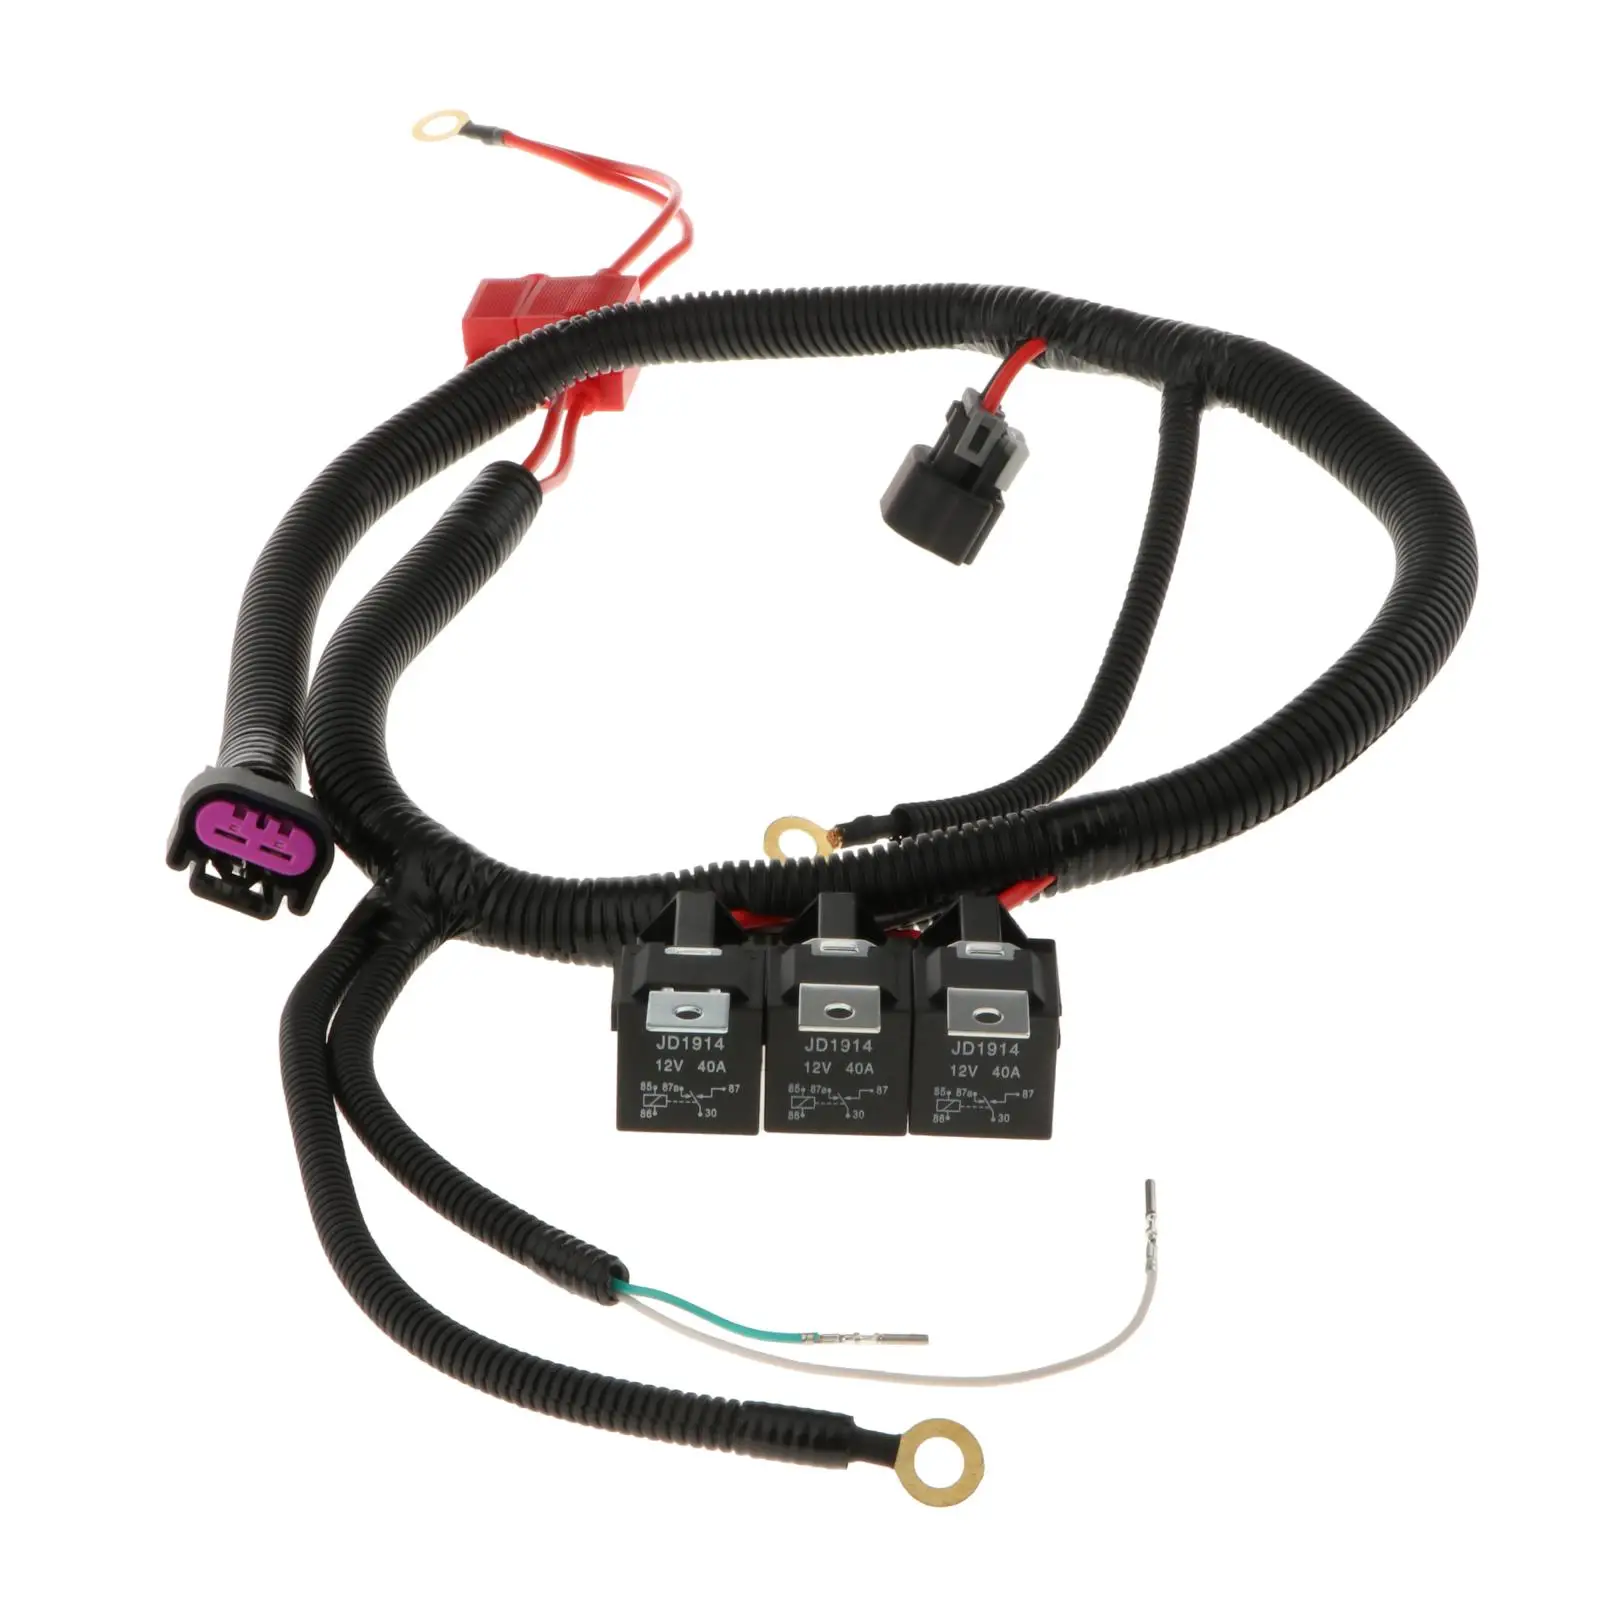 Dual Electric Fan Upgrade Wiring Harness Replacement fits For 1999?2006 ECU Control